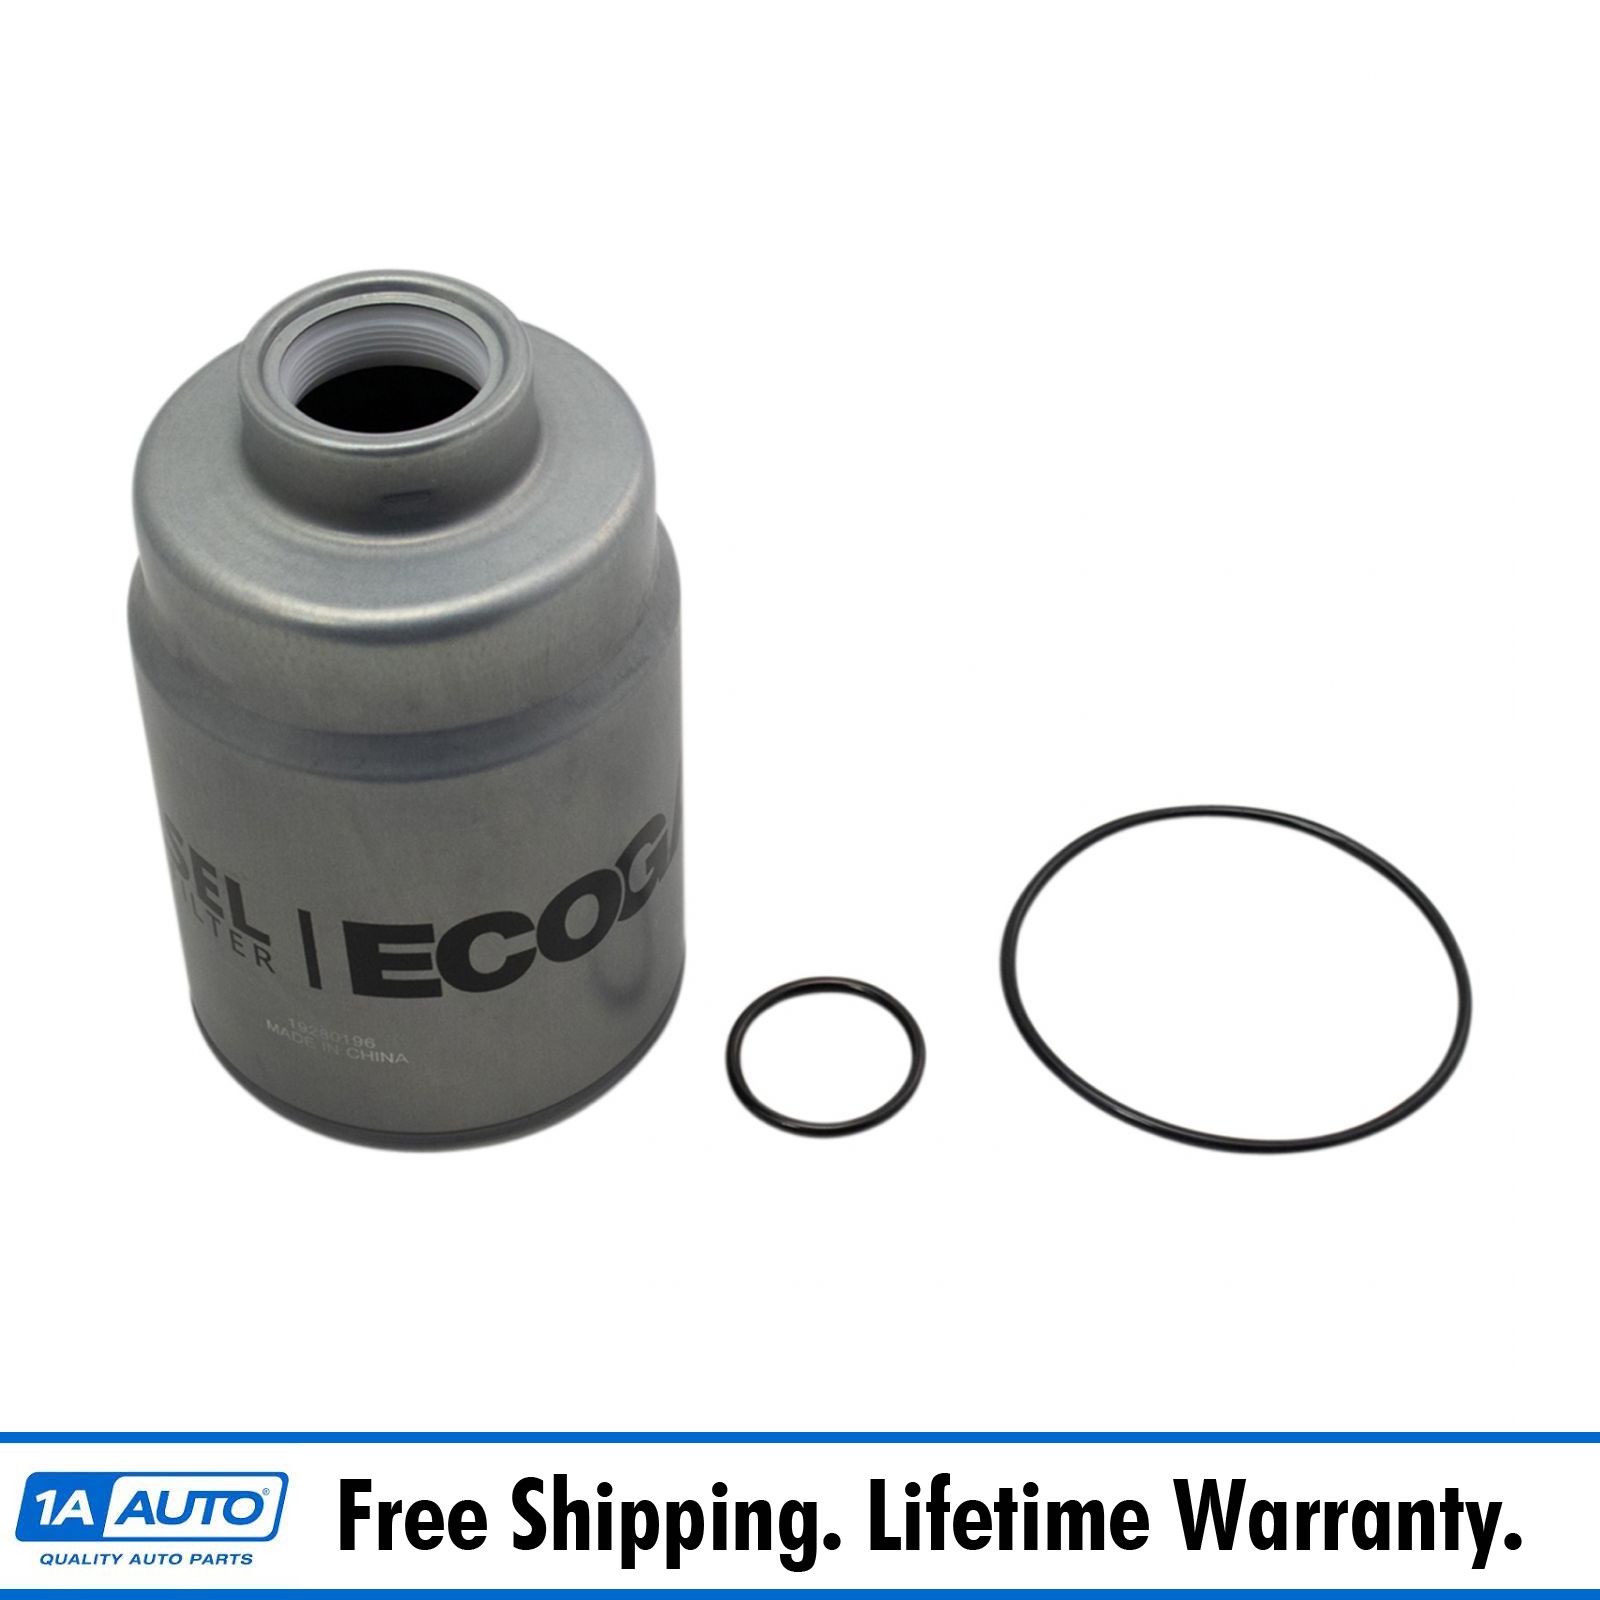 AC DELCO GF578 Fuel Gas Filter for Chevy Cadillac Buick Pontiac Olds GMC Van